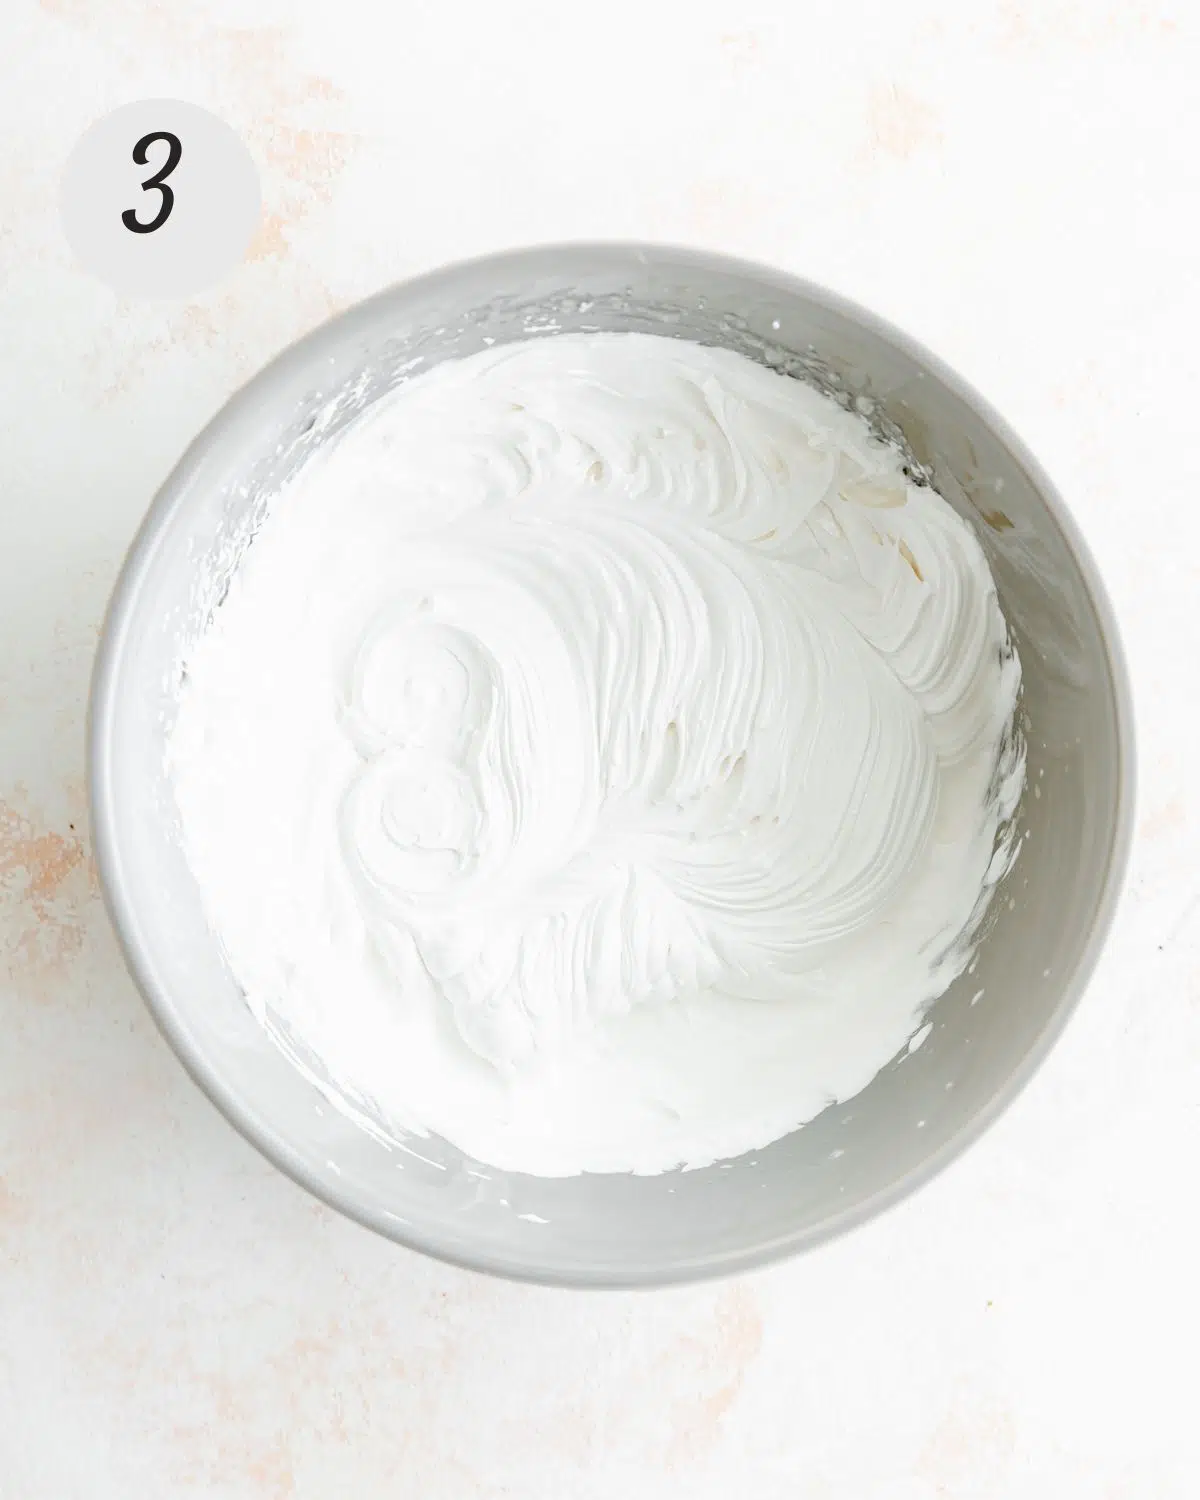 whipped aquafaba in a bowl.